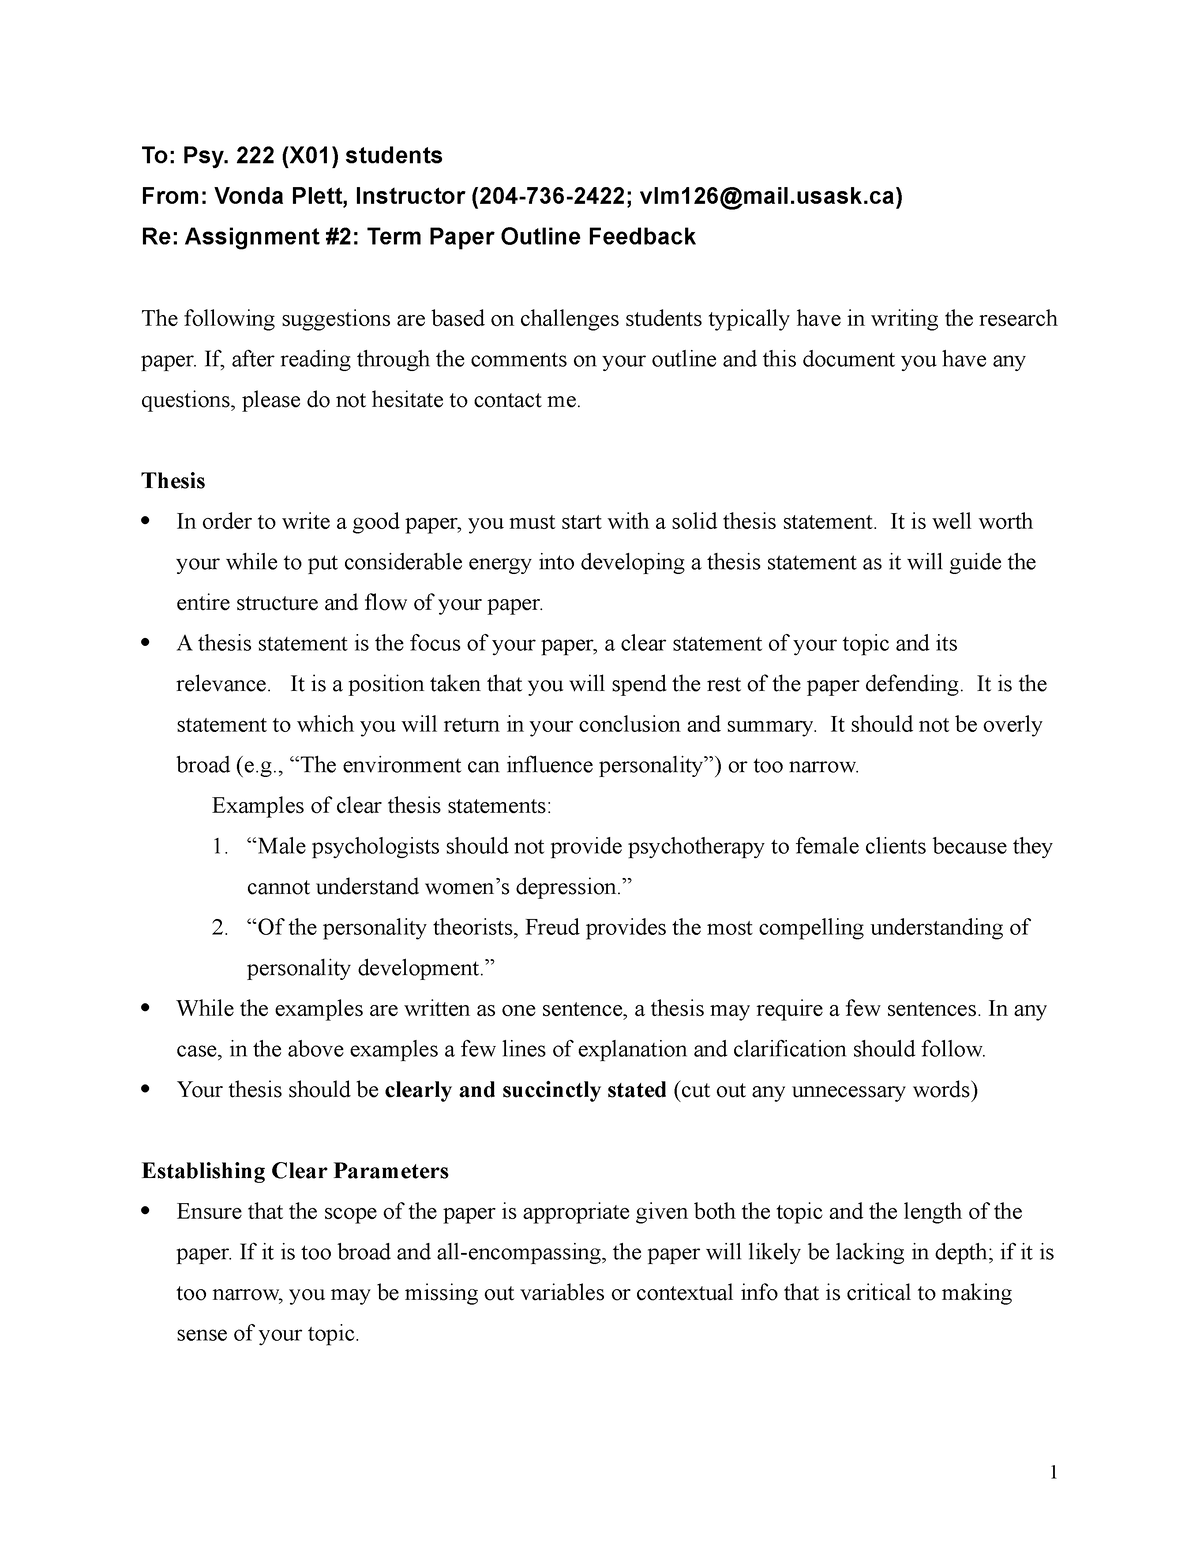 An outline feedback sheet - To: Psy. 222 (X01) students From: Vonda ...